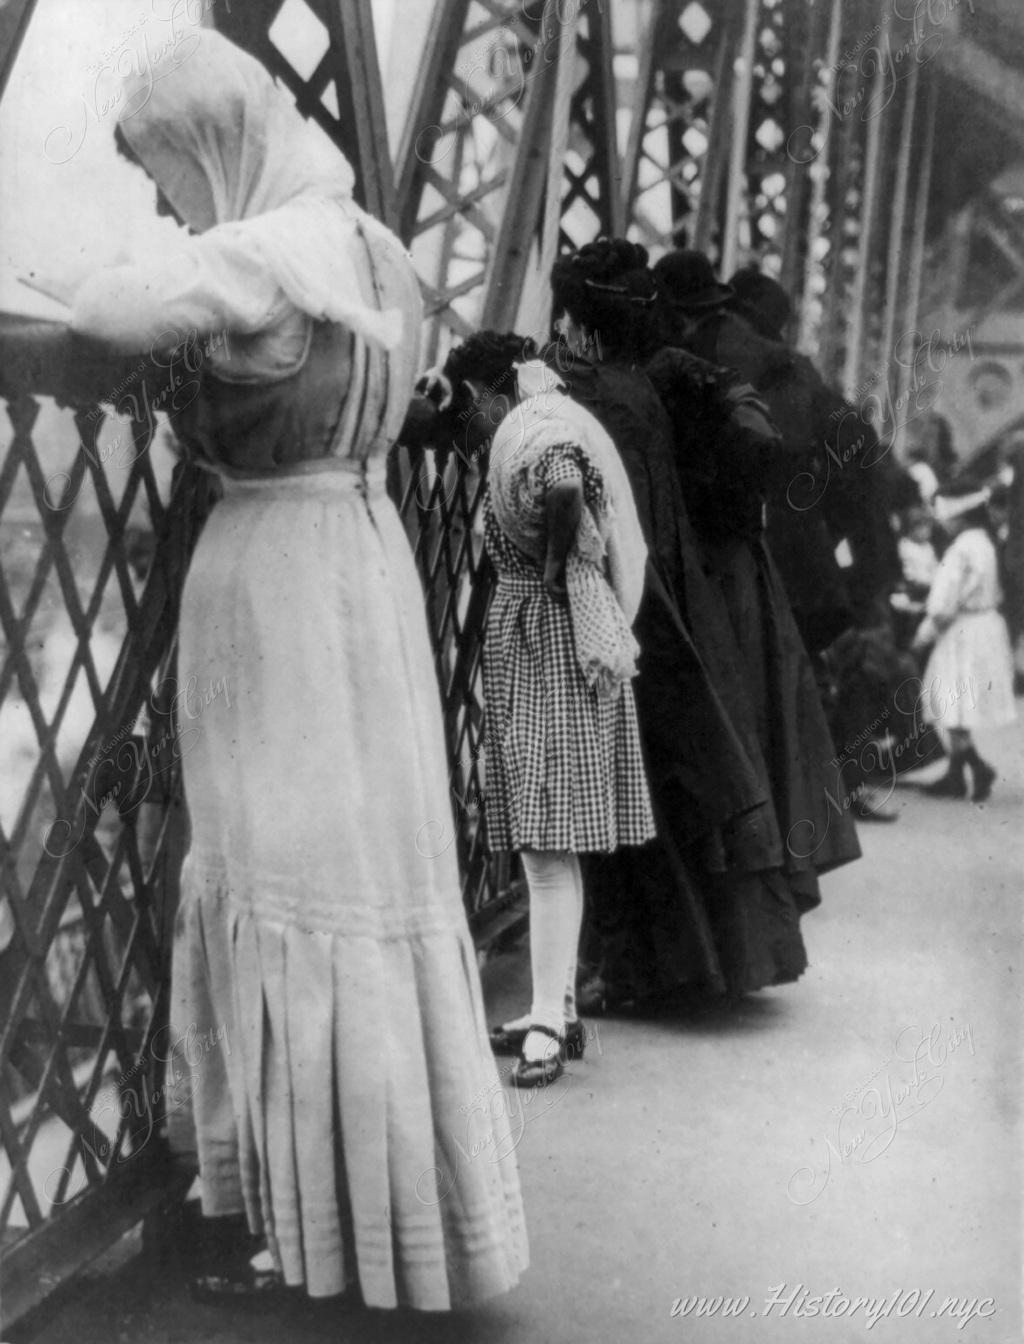 A group of Jewish citizens recite prayers on the pedestrian path of the Williamsburg Bridge for the Jewish New Year.